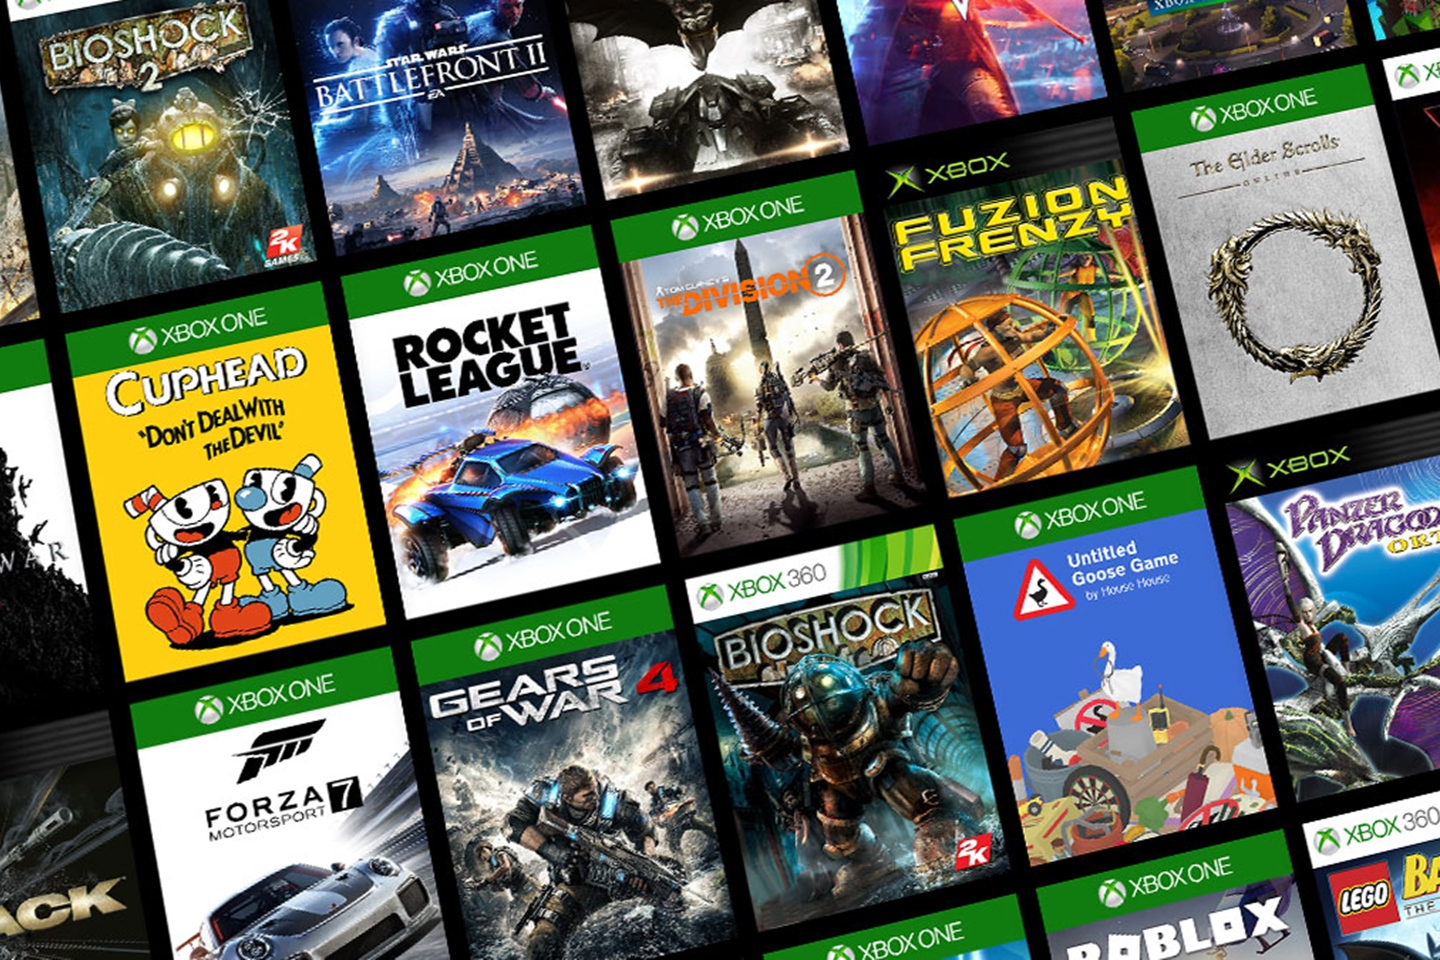 Rumors about the end of Xbox game localization in Brazil are false.